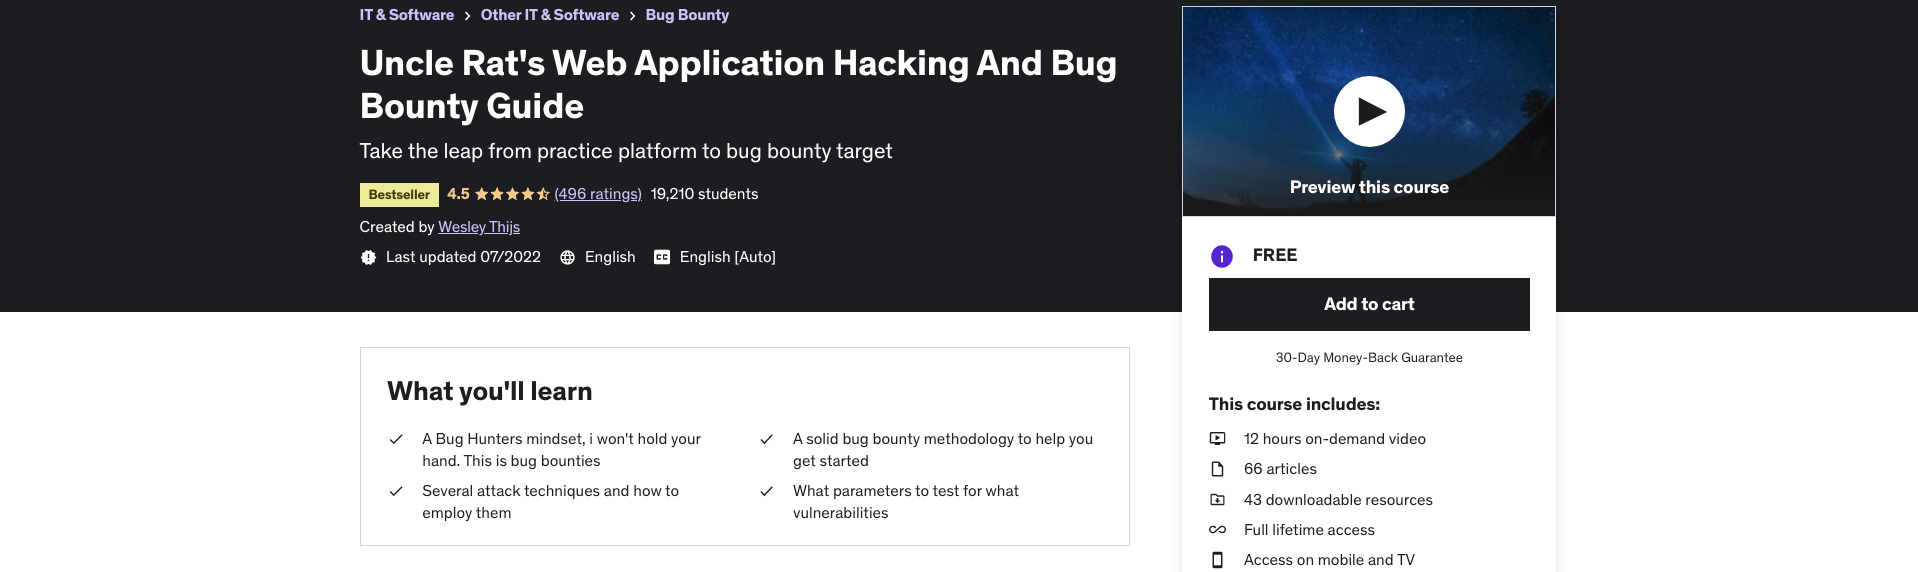 Uncle Rat's Web Application Hacking And Bug Bounty Guide